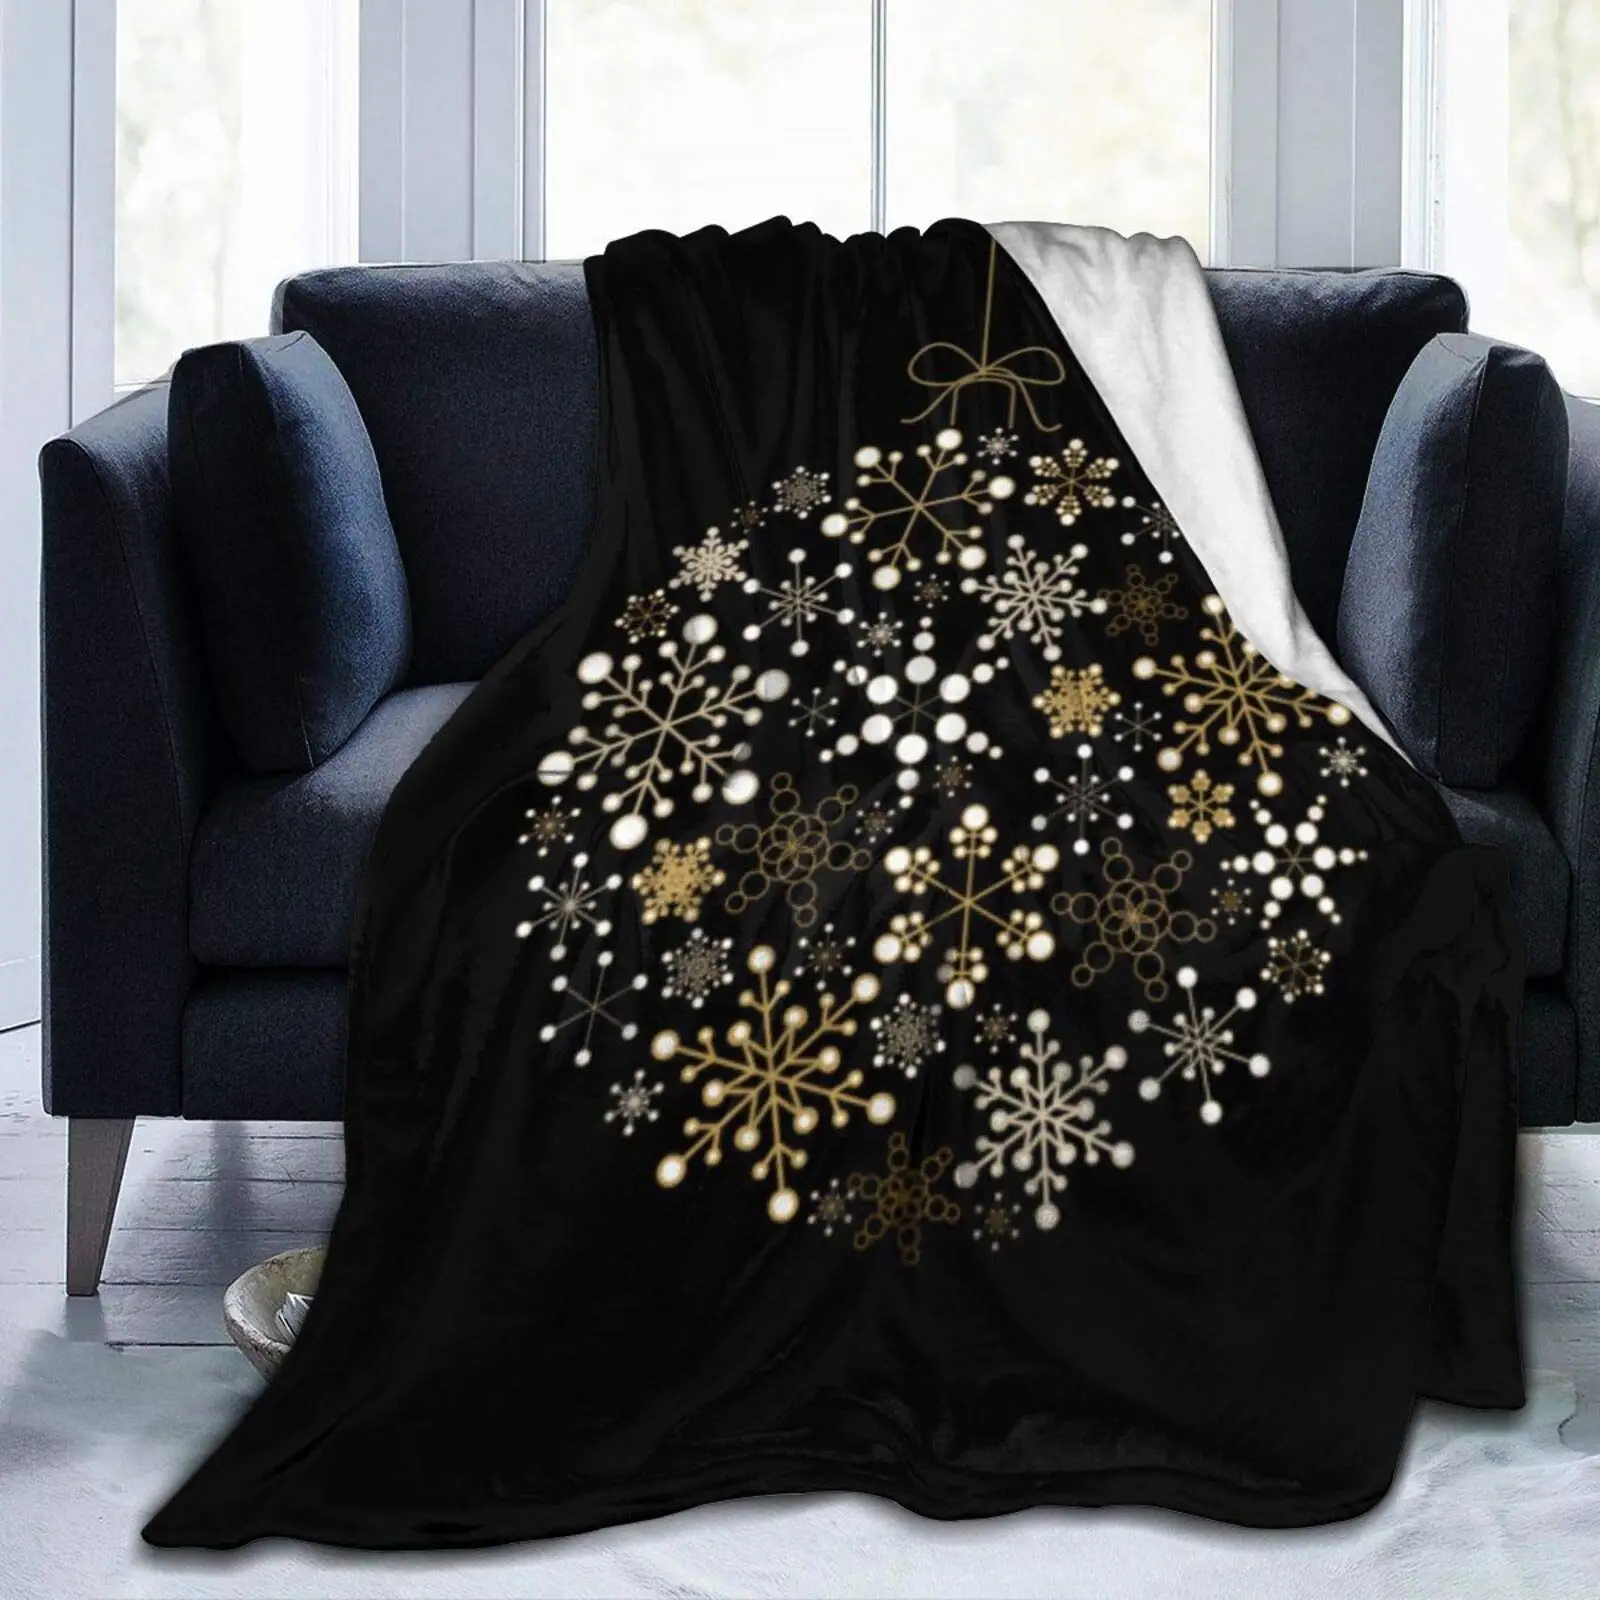 

Christmas Fleece Throw Blanket Christmas Ball Made from Golden Lightweight Cozy Soft Plush Blanket for Couch Sofa Bed-60"x50"